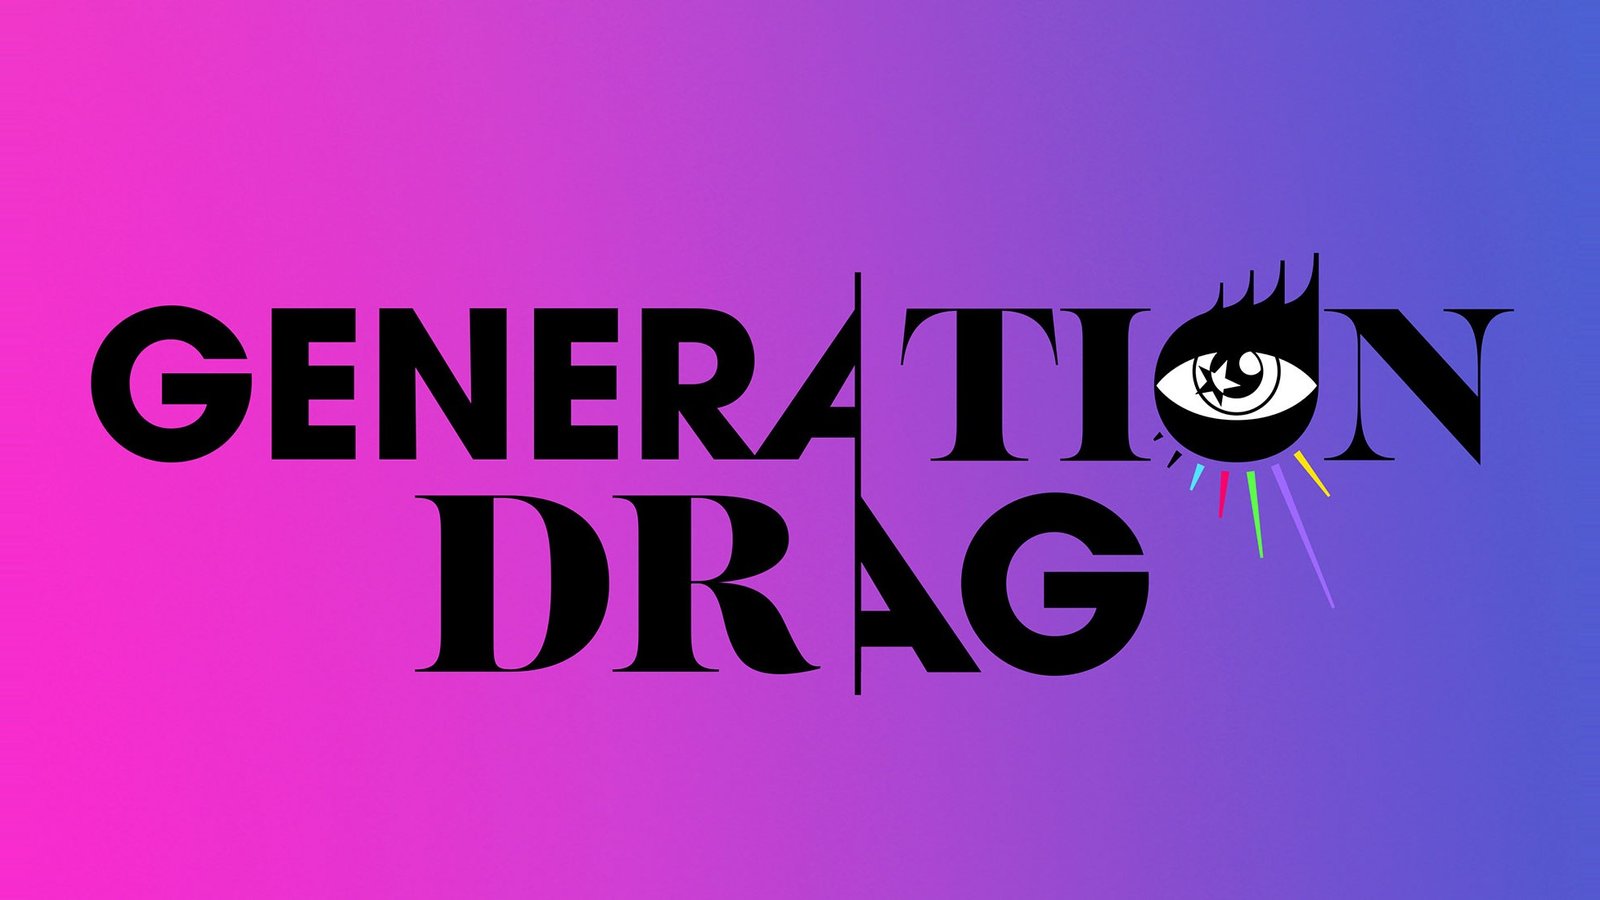 How To Watch Generation Drag Online From Anywhere?